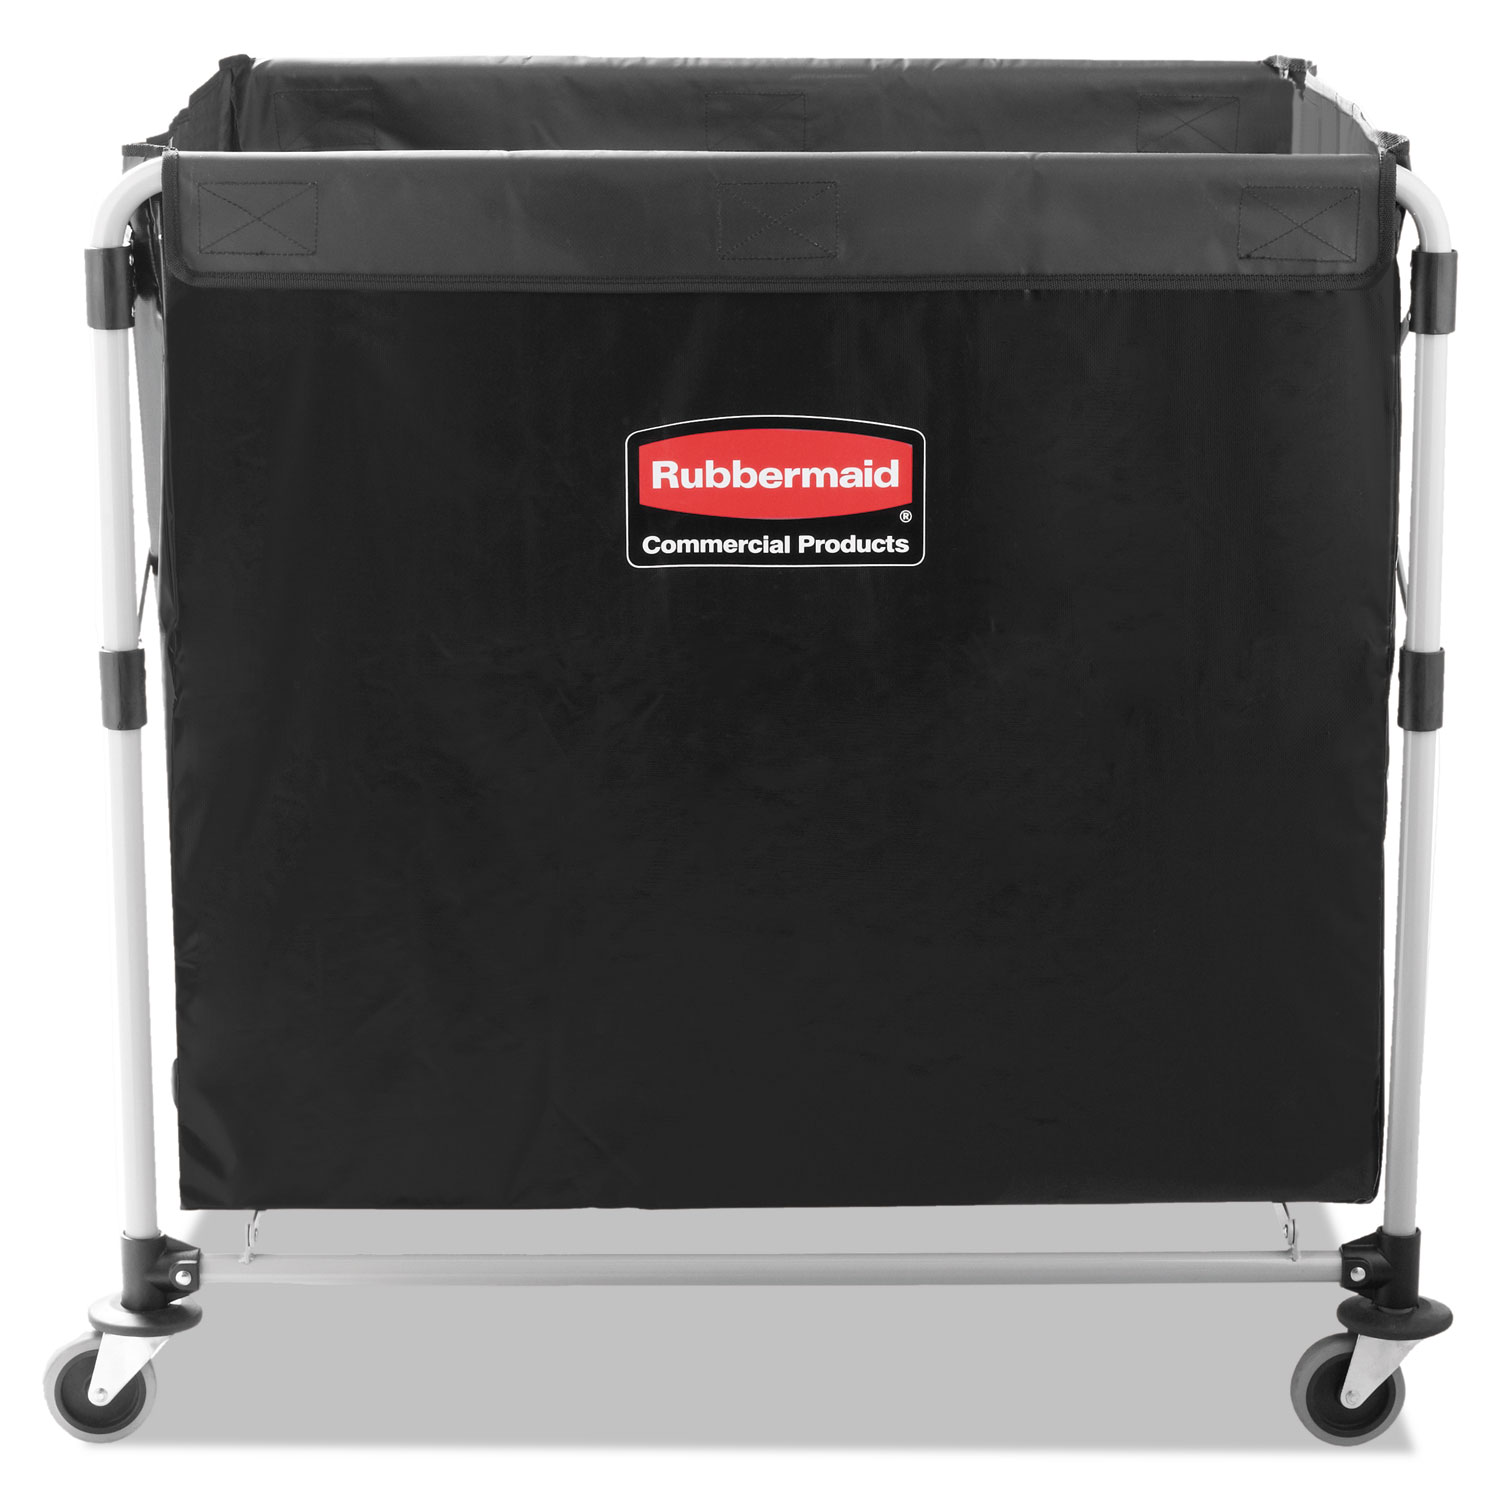  Rubbermaid Commercial 1881750 Collapsible X-Cart, Steel, Eight Bushel Cart, 24.1w x 35.7d x 34h, Black/Silver (RCP1881750) 